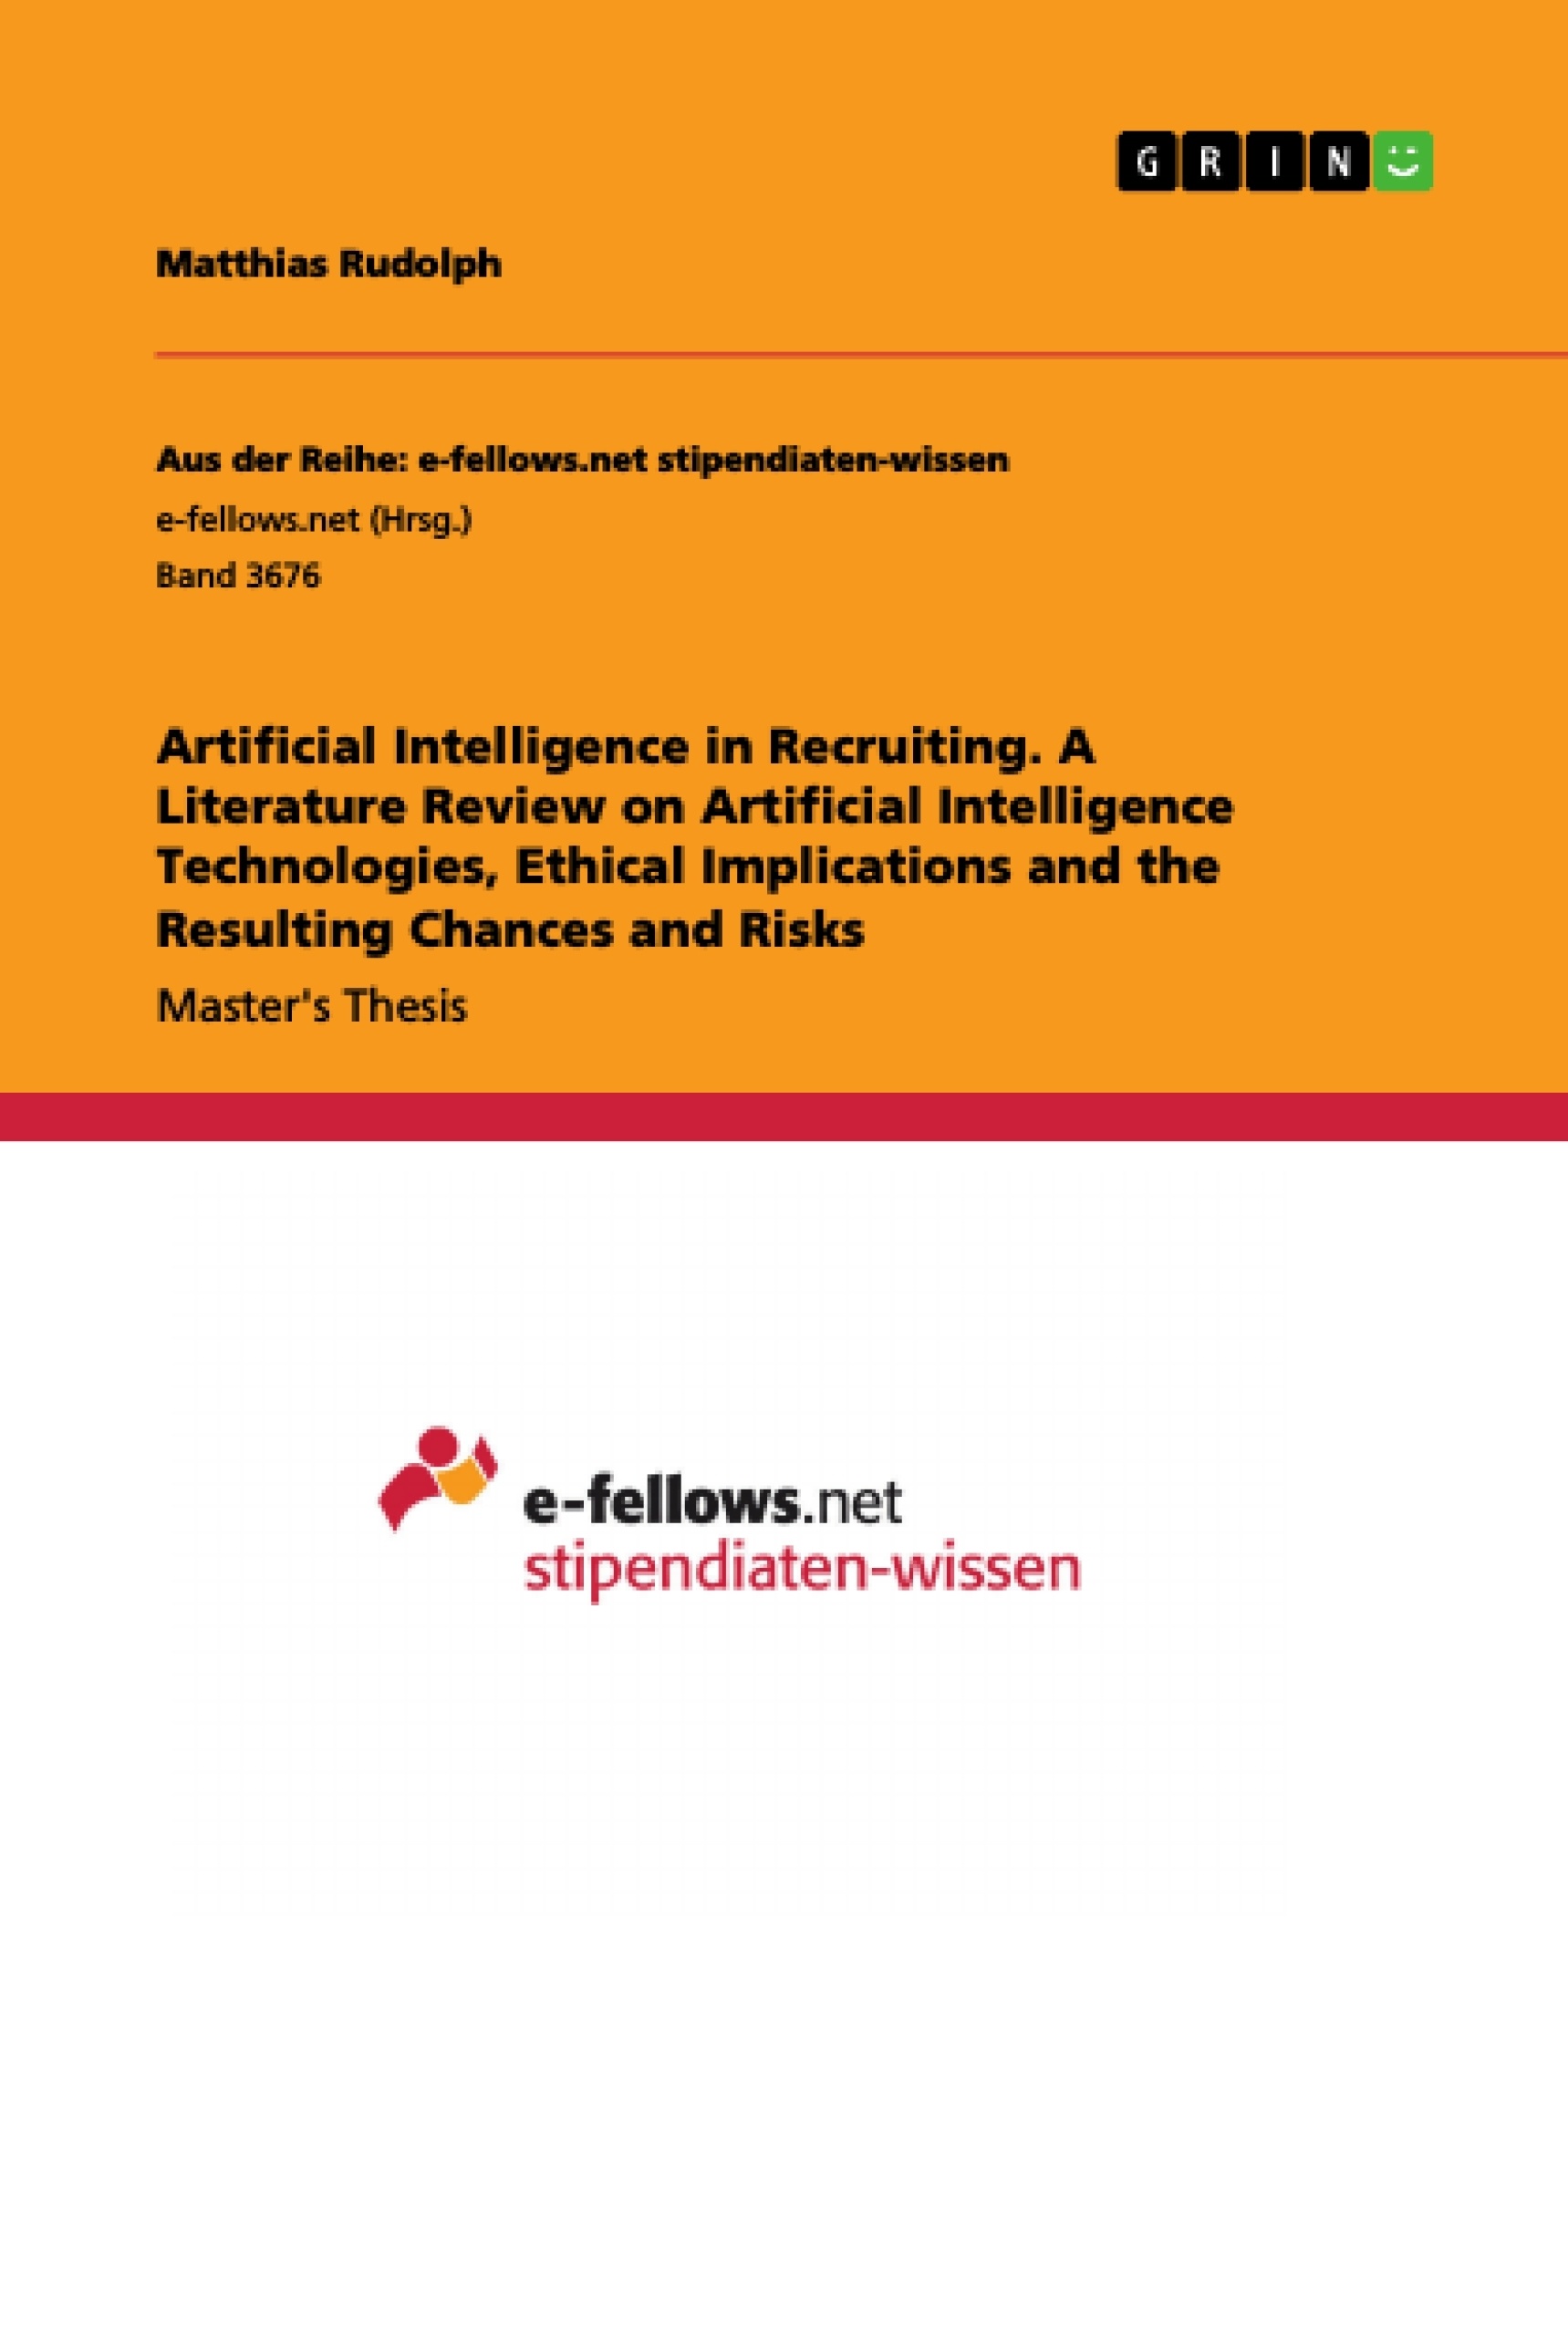 Title: Artificial Intelligence in Recruiting. A Literature Review on Artificial Intelligence Technologies, Ethical Implications and the Resulting Chances and Risks